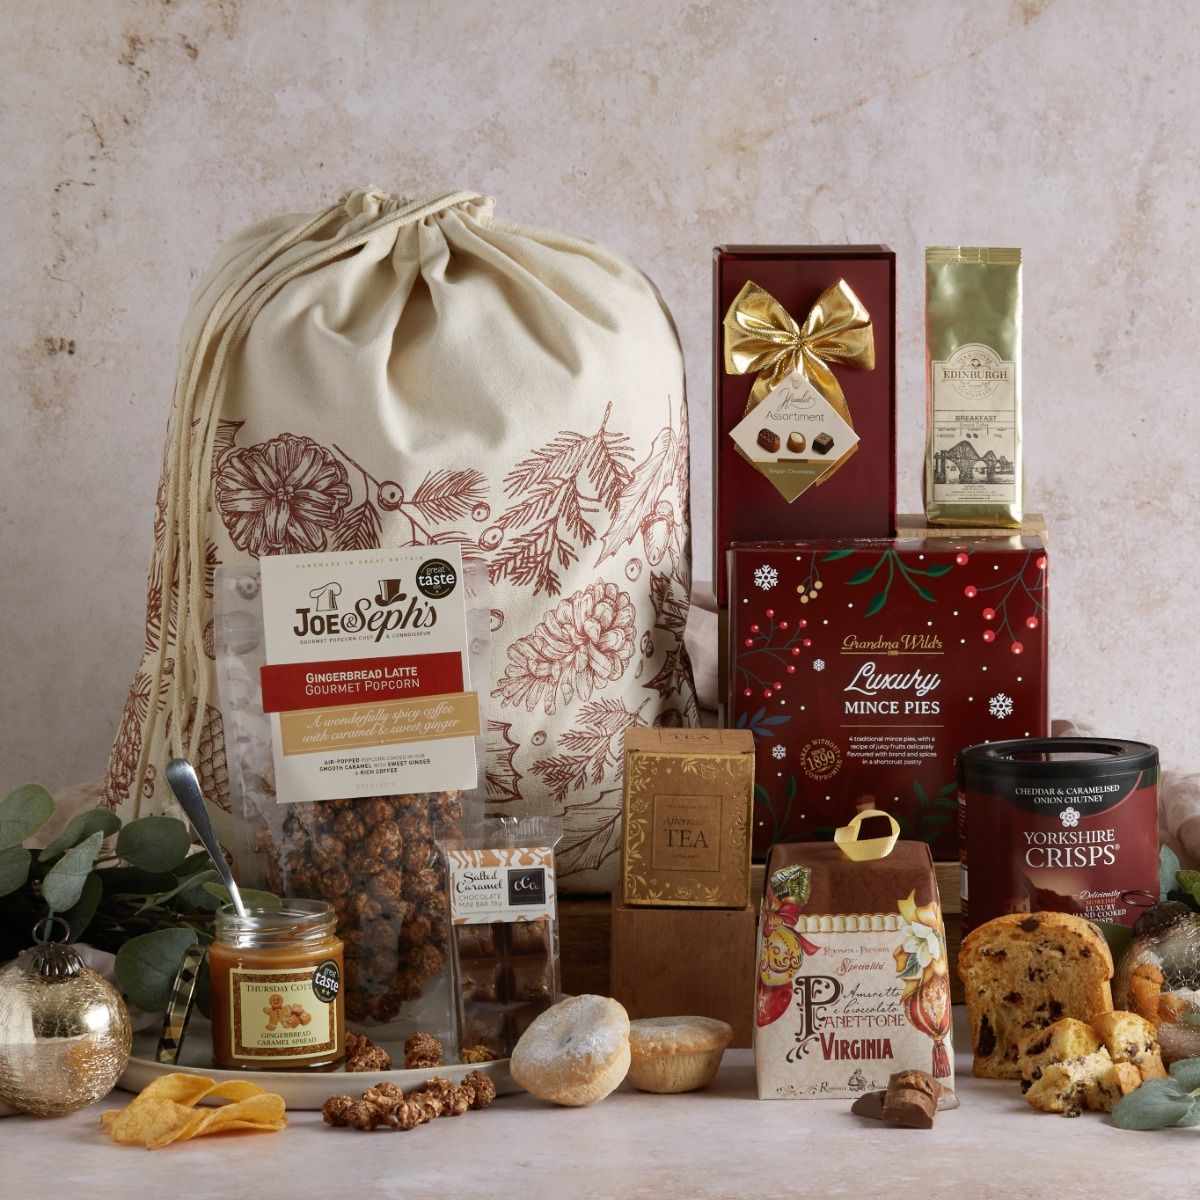 Festive favourites hamper with contents on display and a illustrated sack